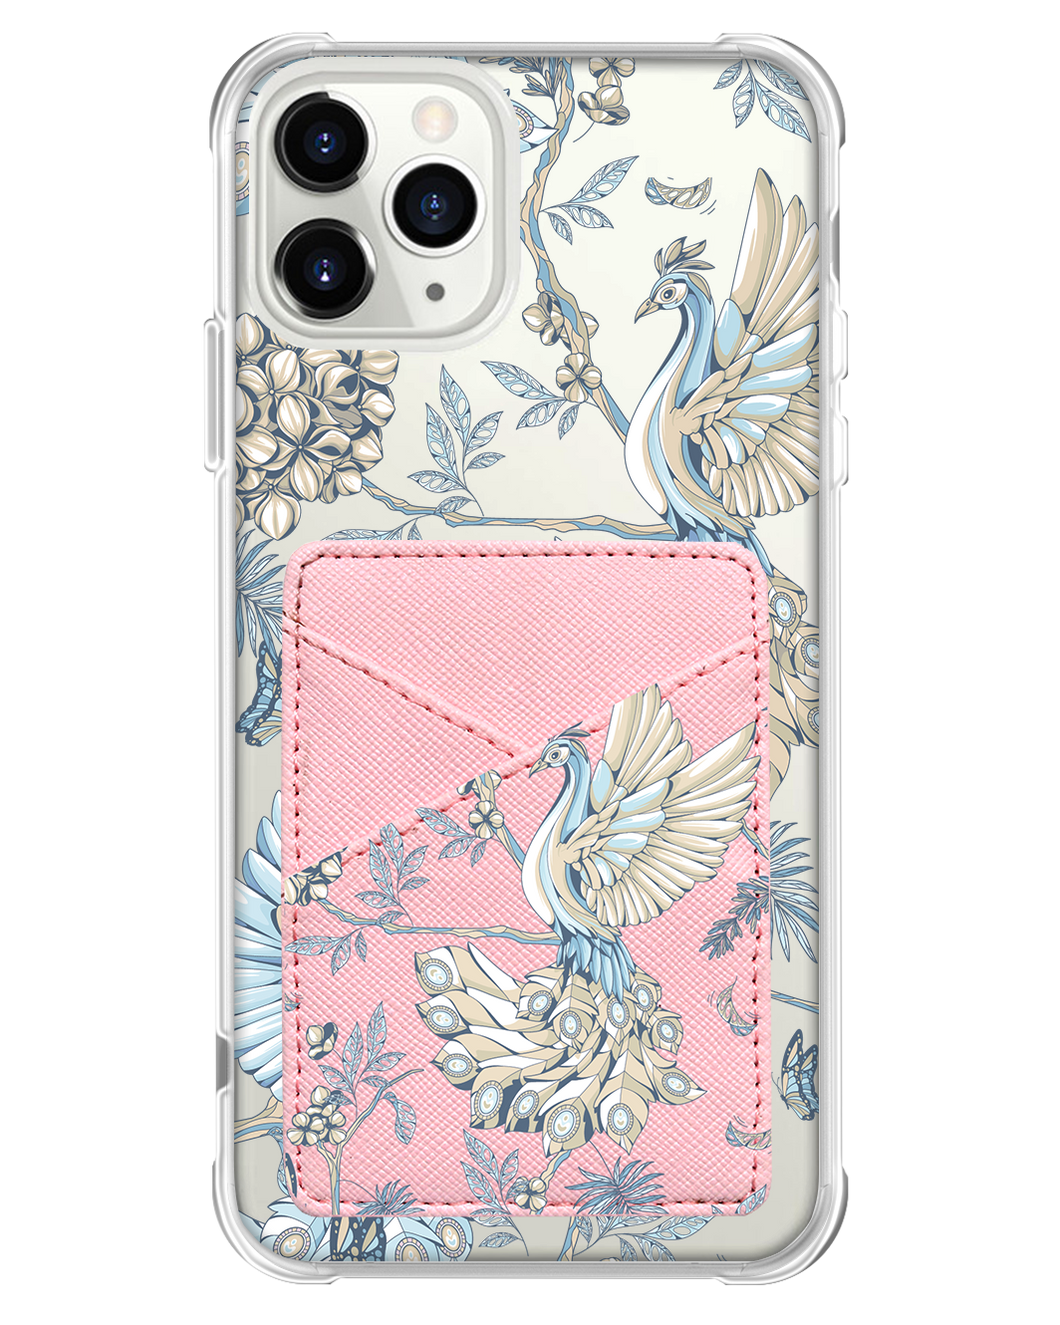 iPhone Phone Wallet Case - Peacock 5.0